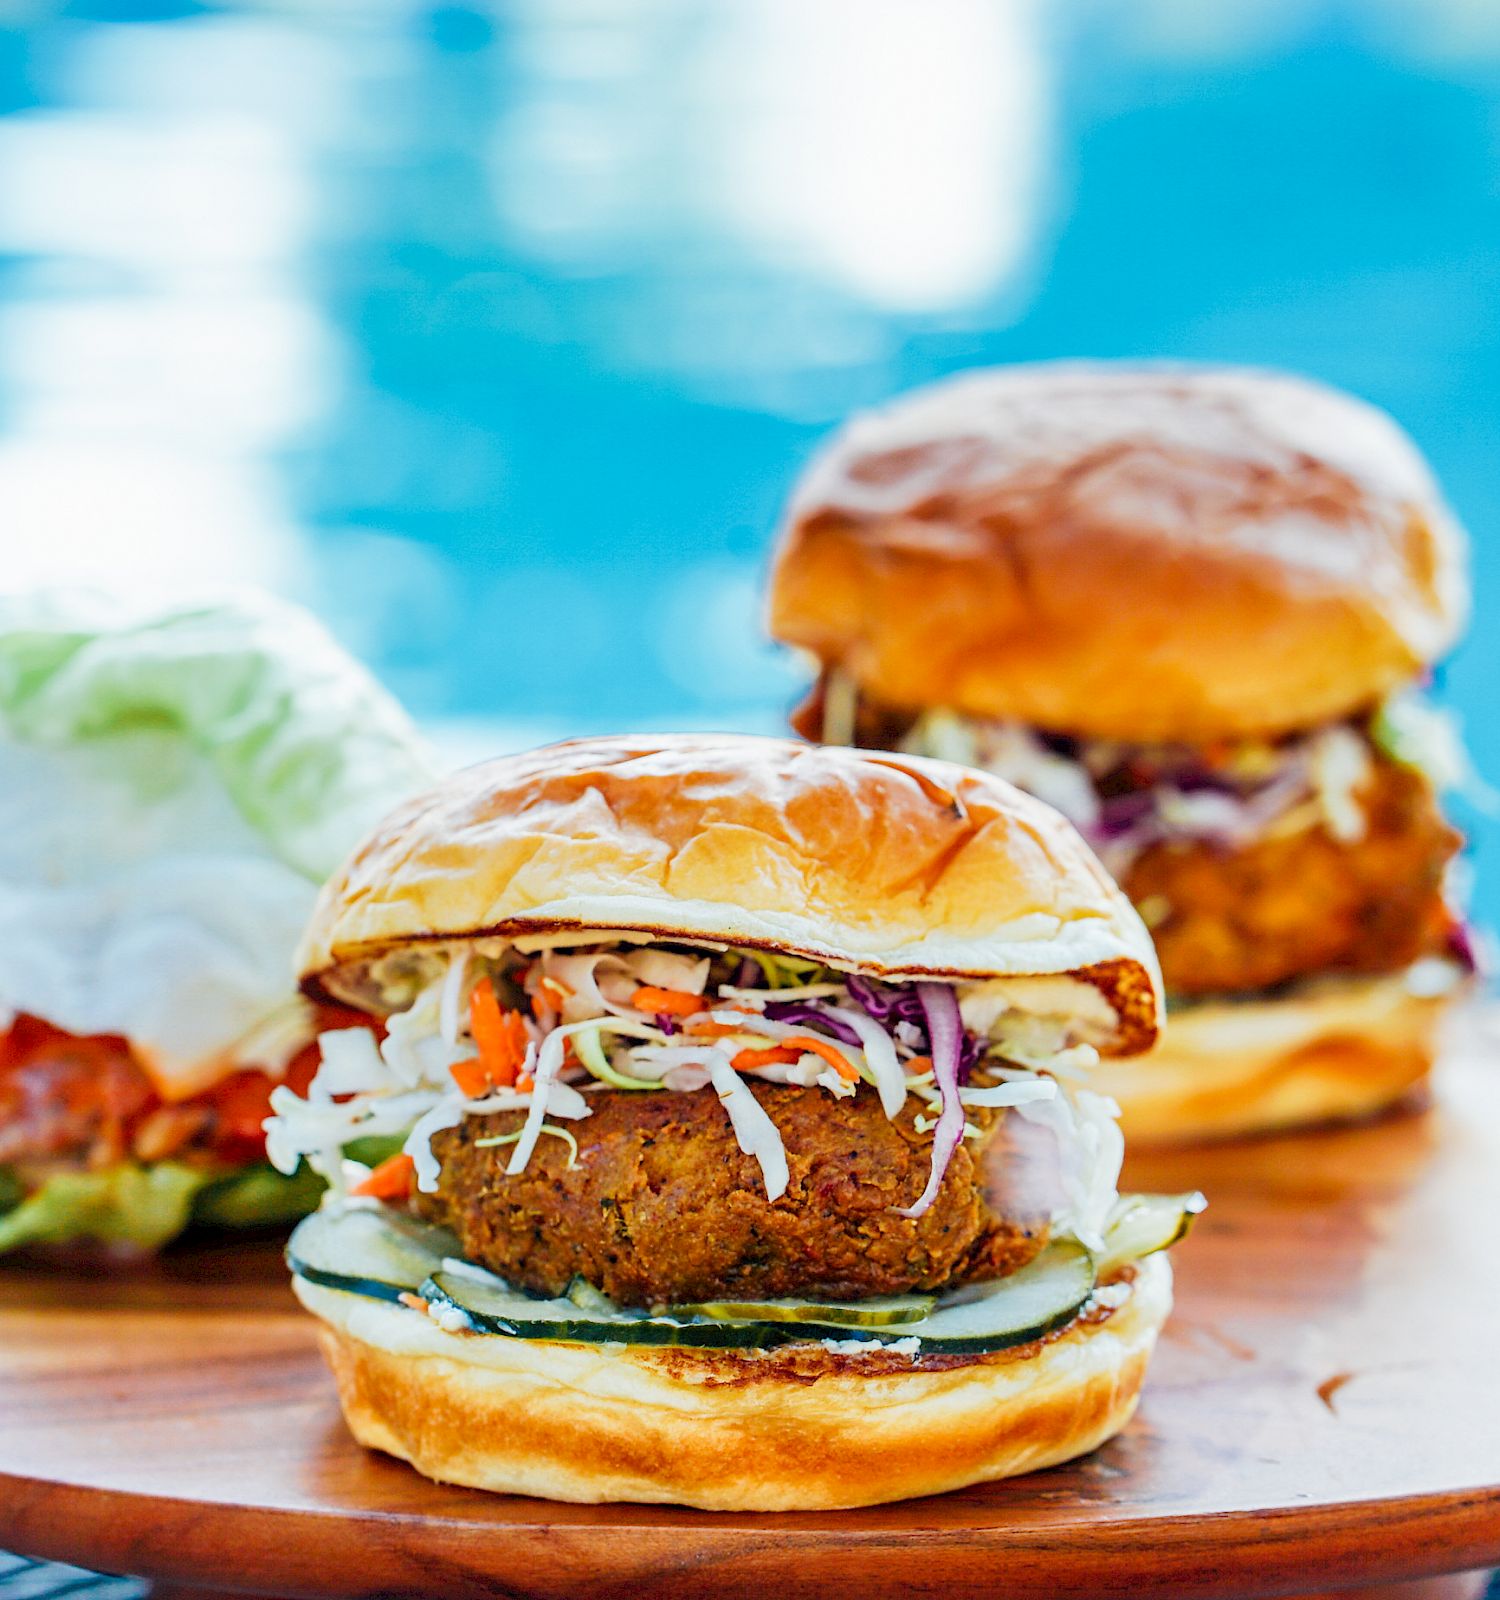 Two fried chicken sandwiches with coleslaw and cucumber on a wooden board, near a pool in the background, with a side salad.